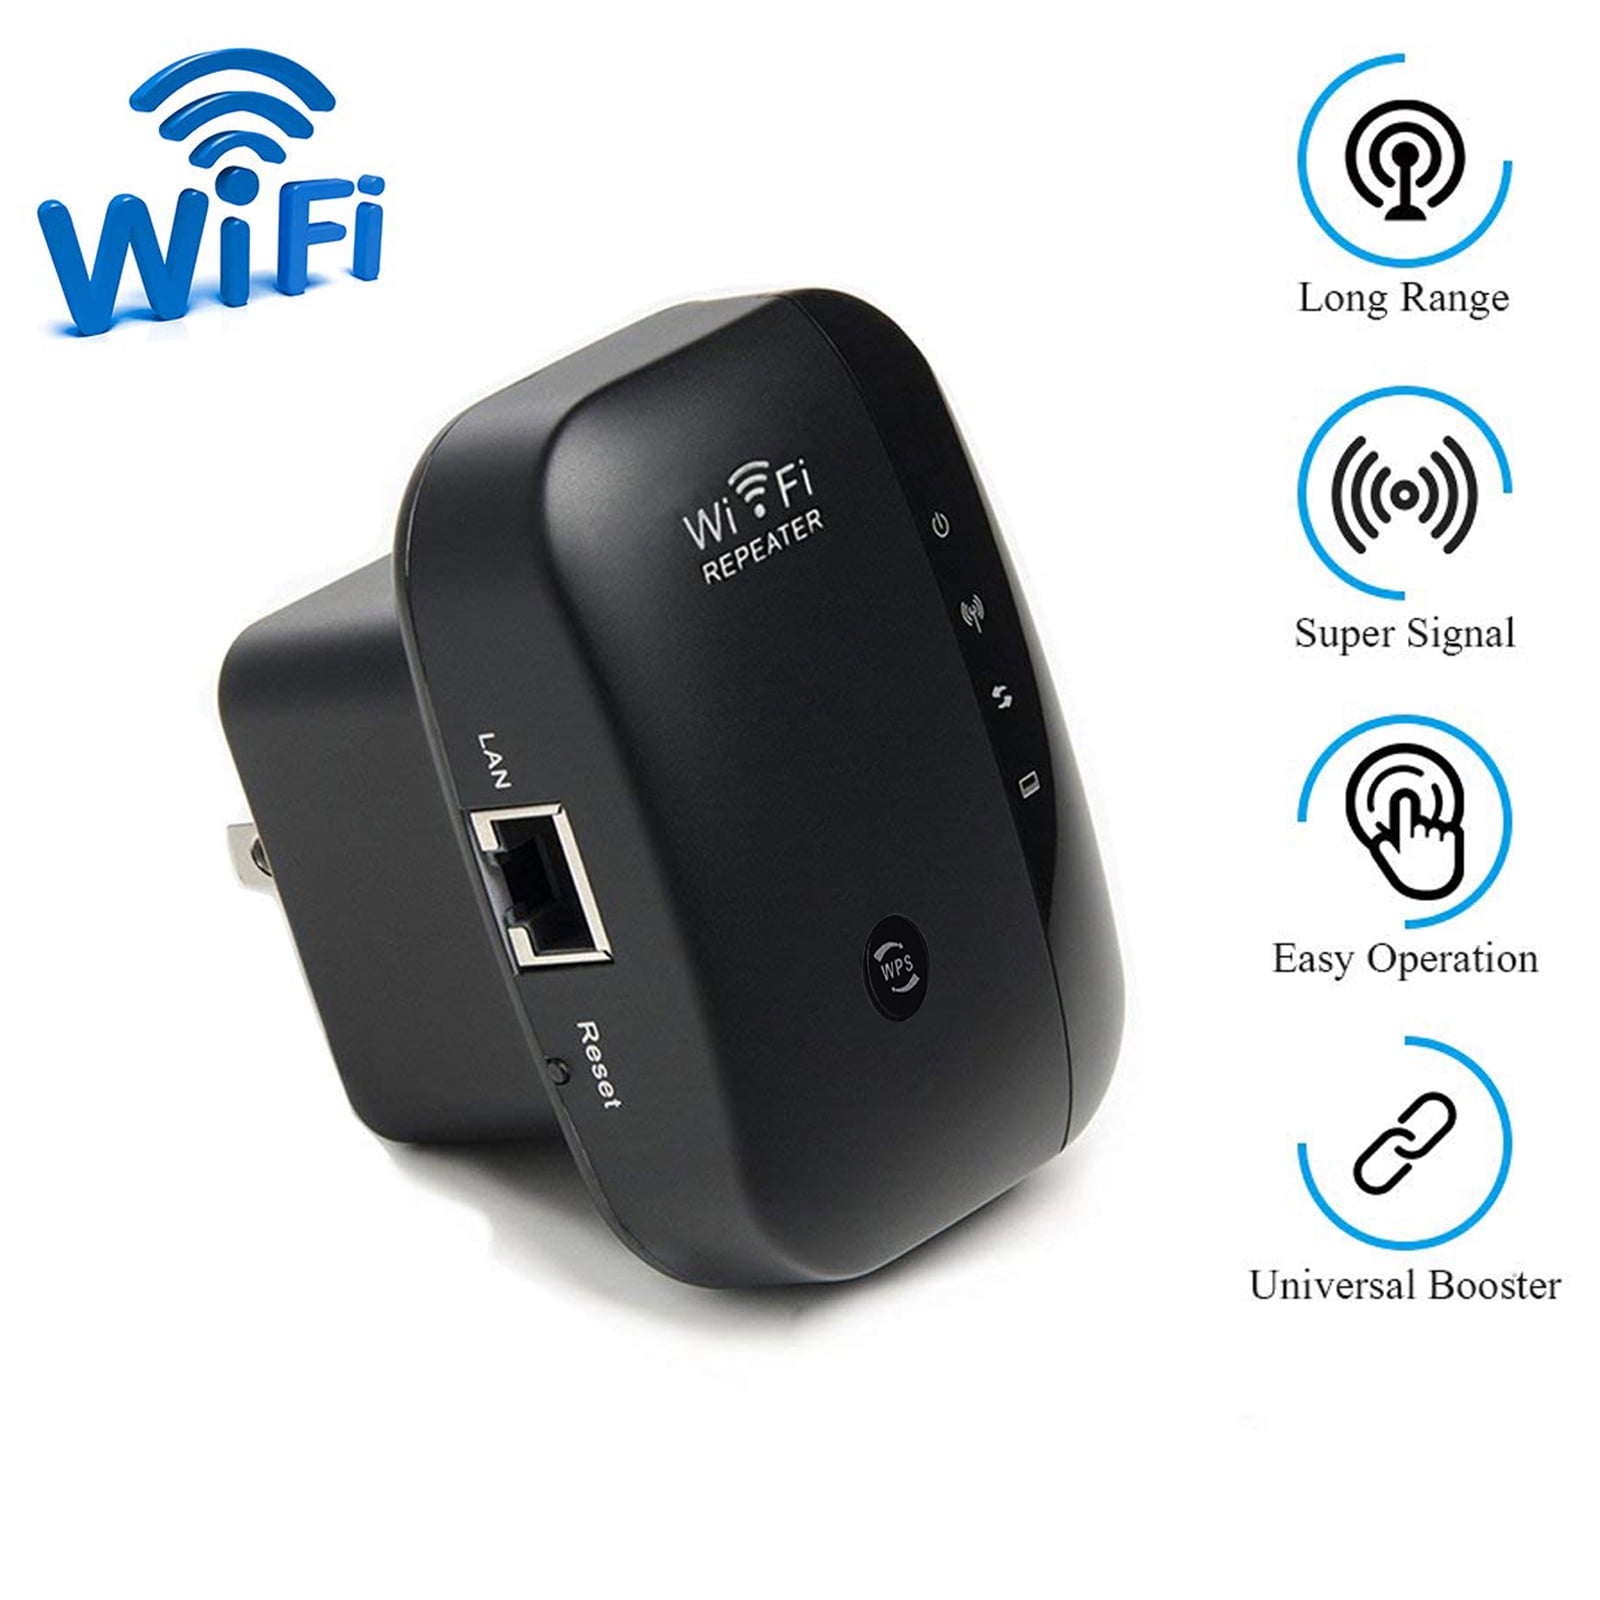 Amyove 300Mbps Wireless Router Range Extender WiFi Repeater Signal Amplifier Booster Network Extender